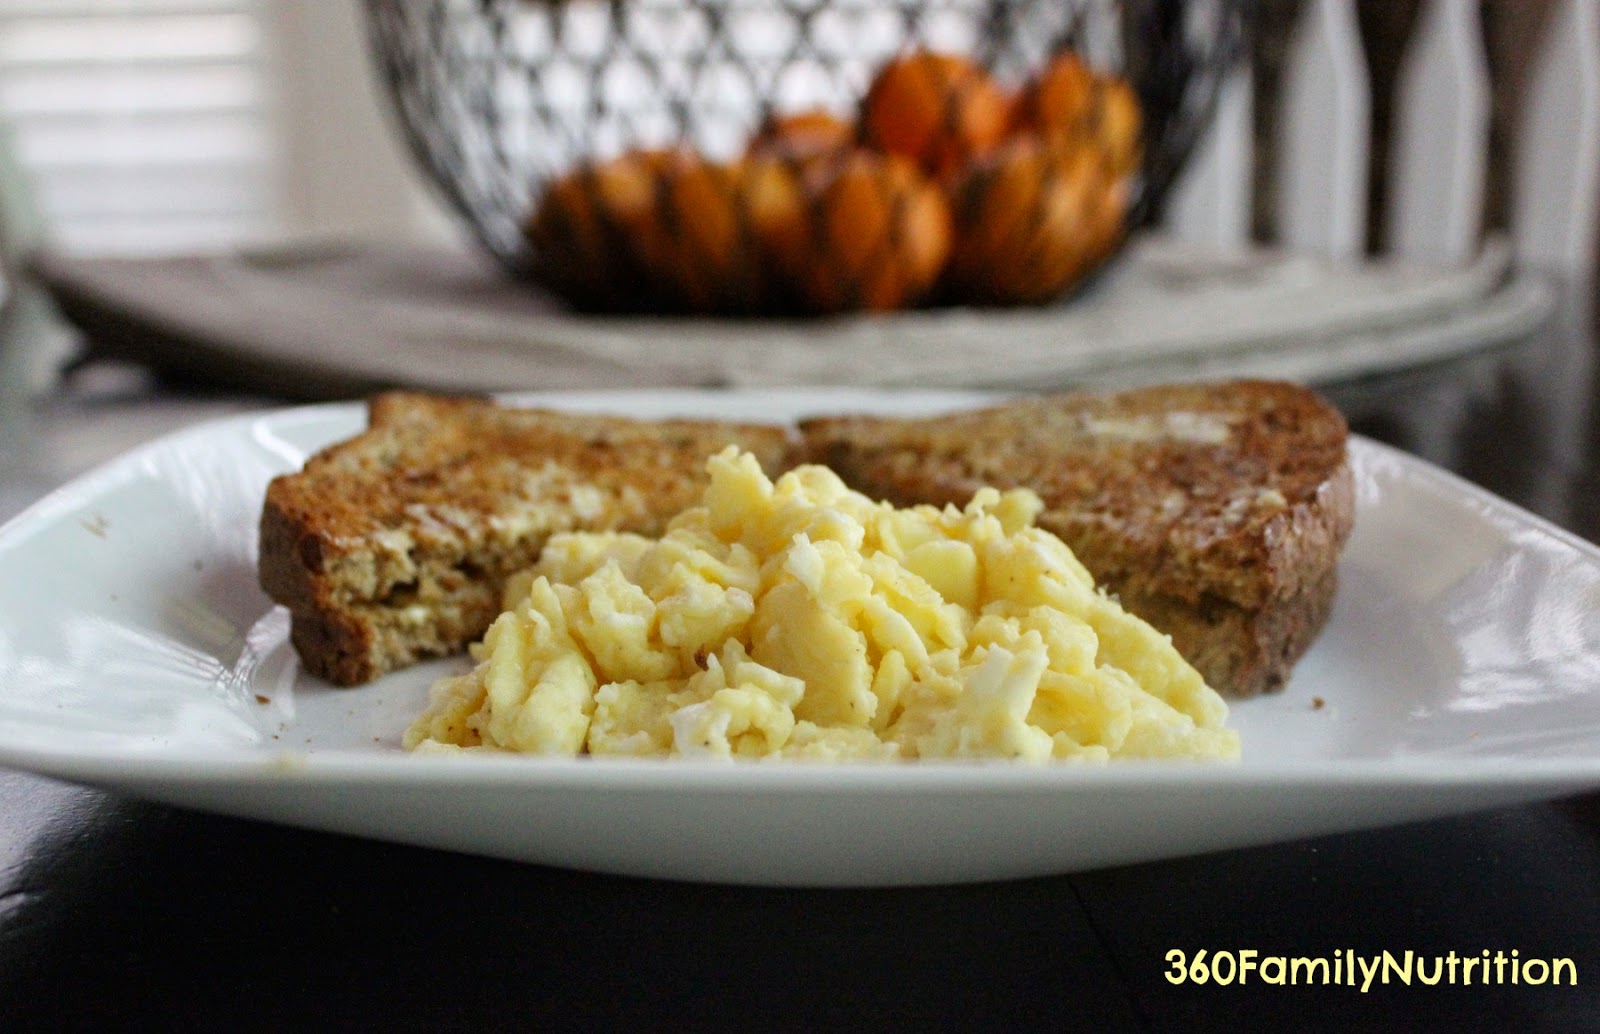 360FamilyNutrition: The Best Lower Calorie Scrambled Eggs